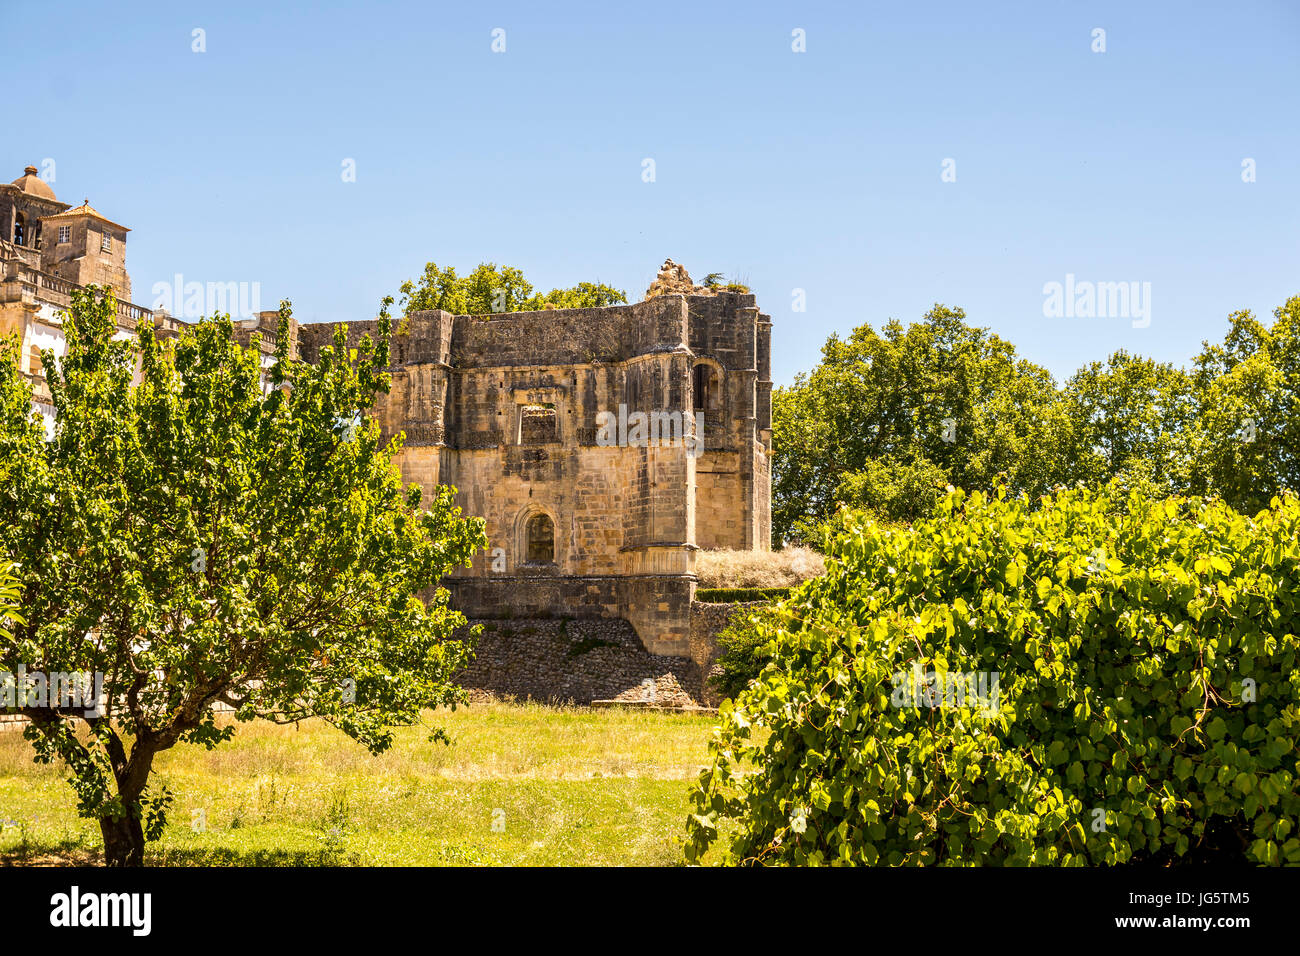 Ancient 600 year old castle in Tomar, Portugal on a very sunny day 2017 Stock Photo